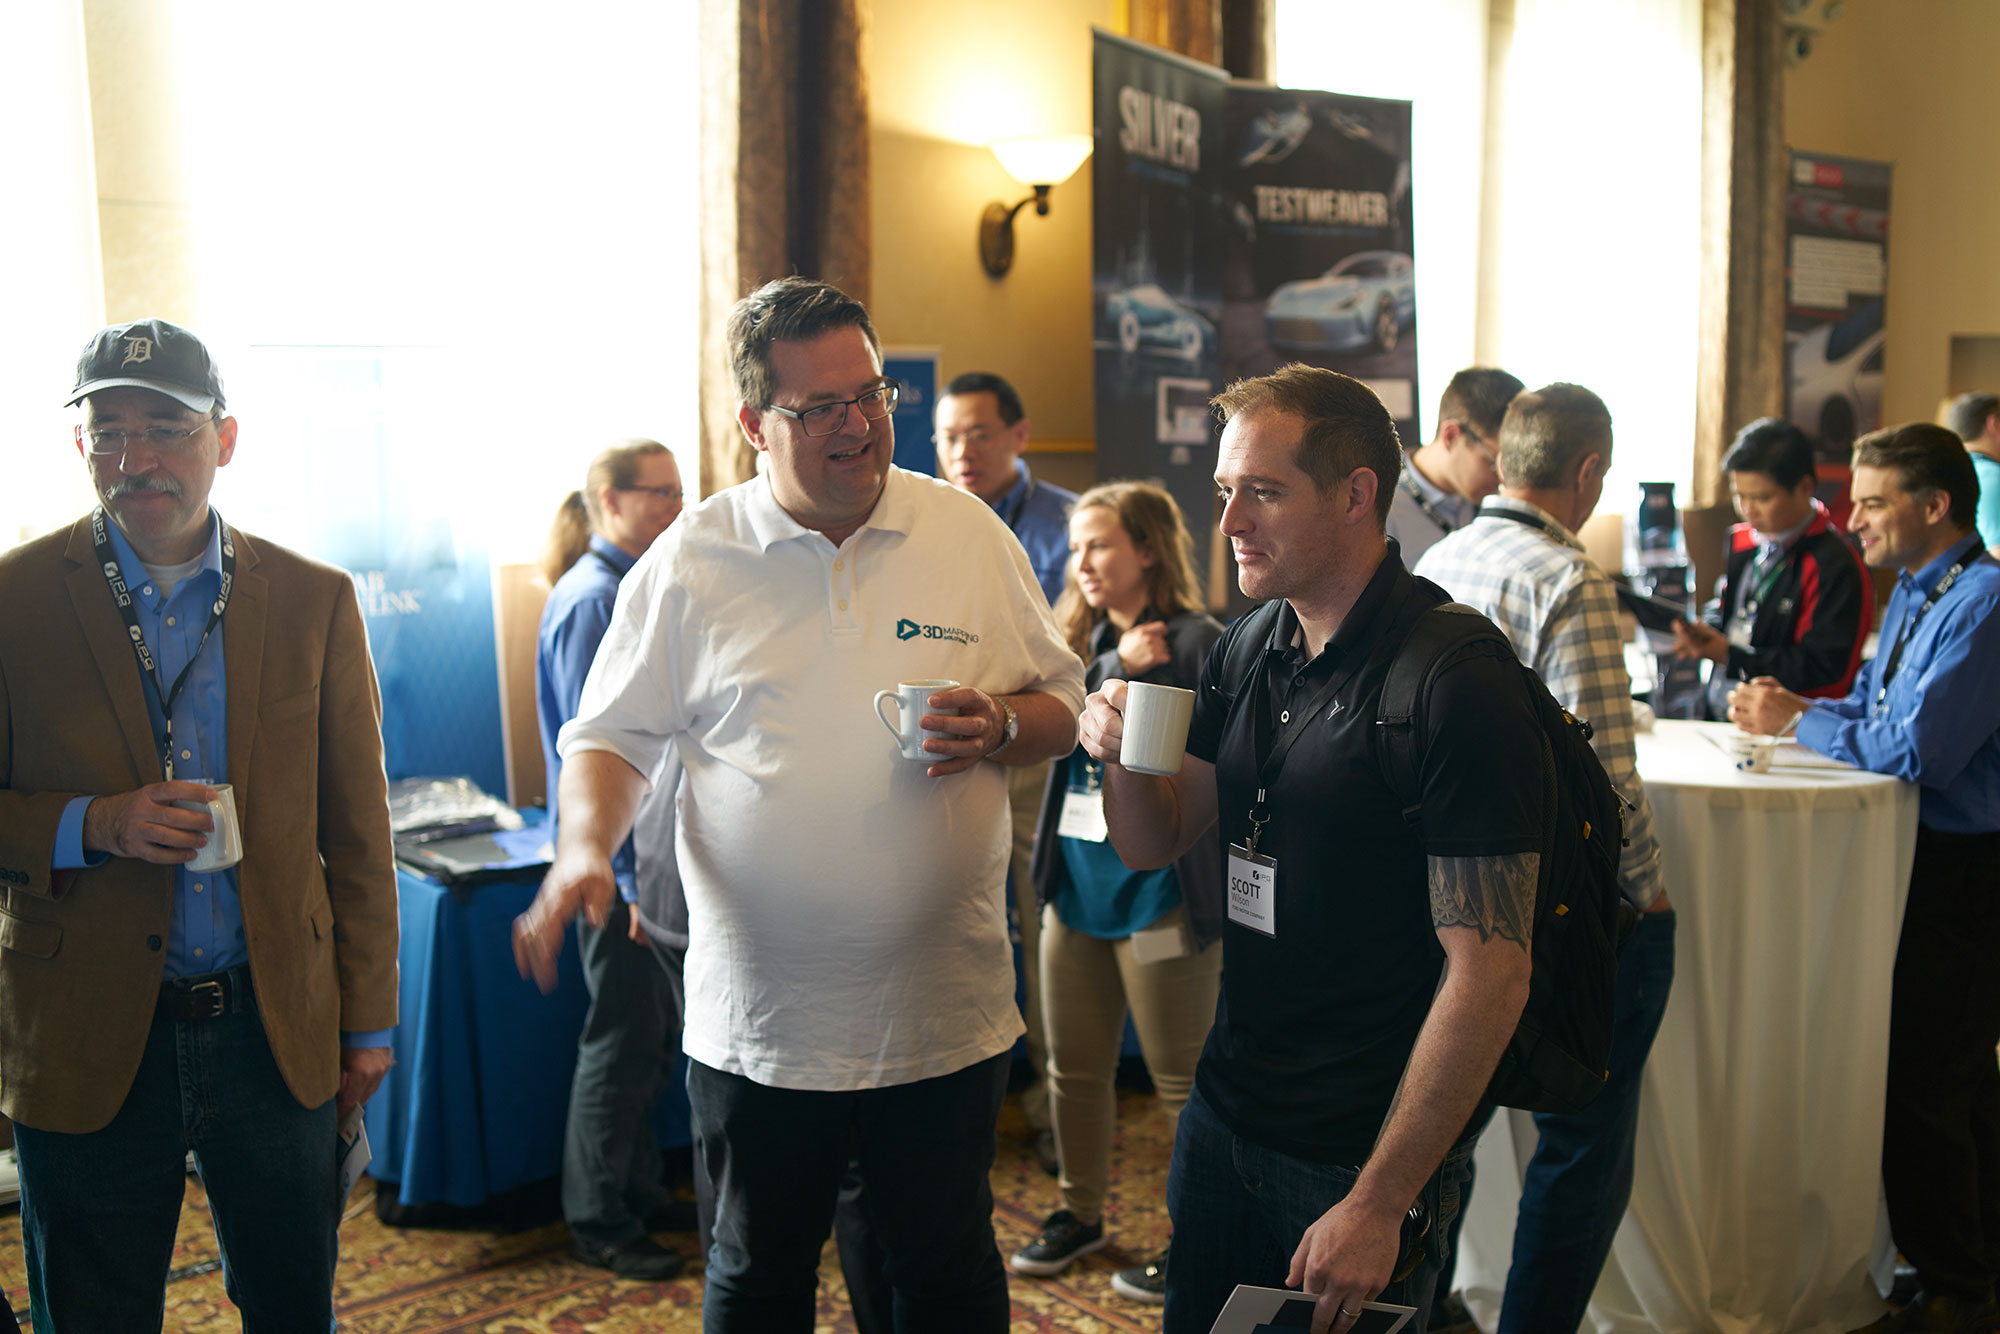 IPG Automotive Open House Local Edition USA 2019 exhibitors